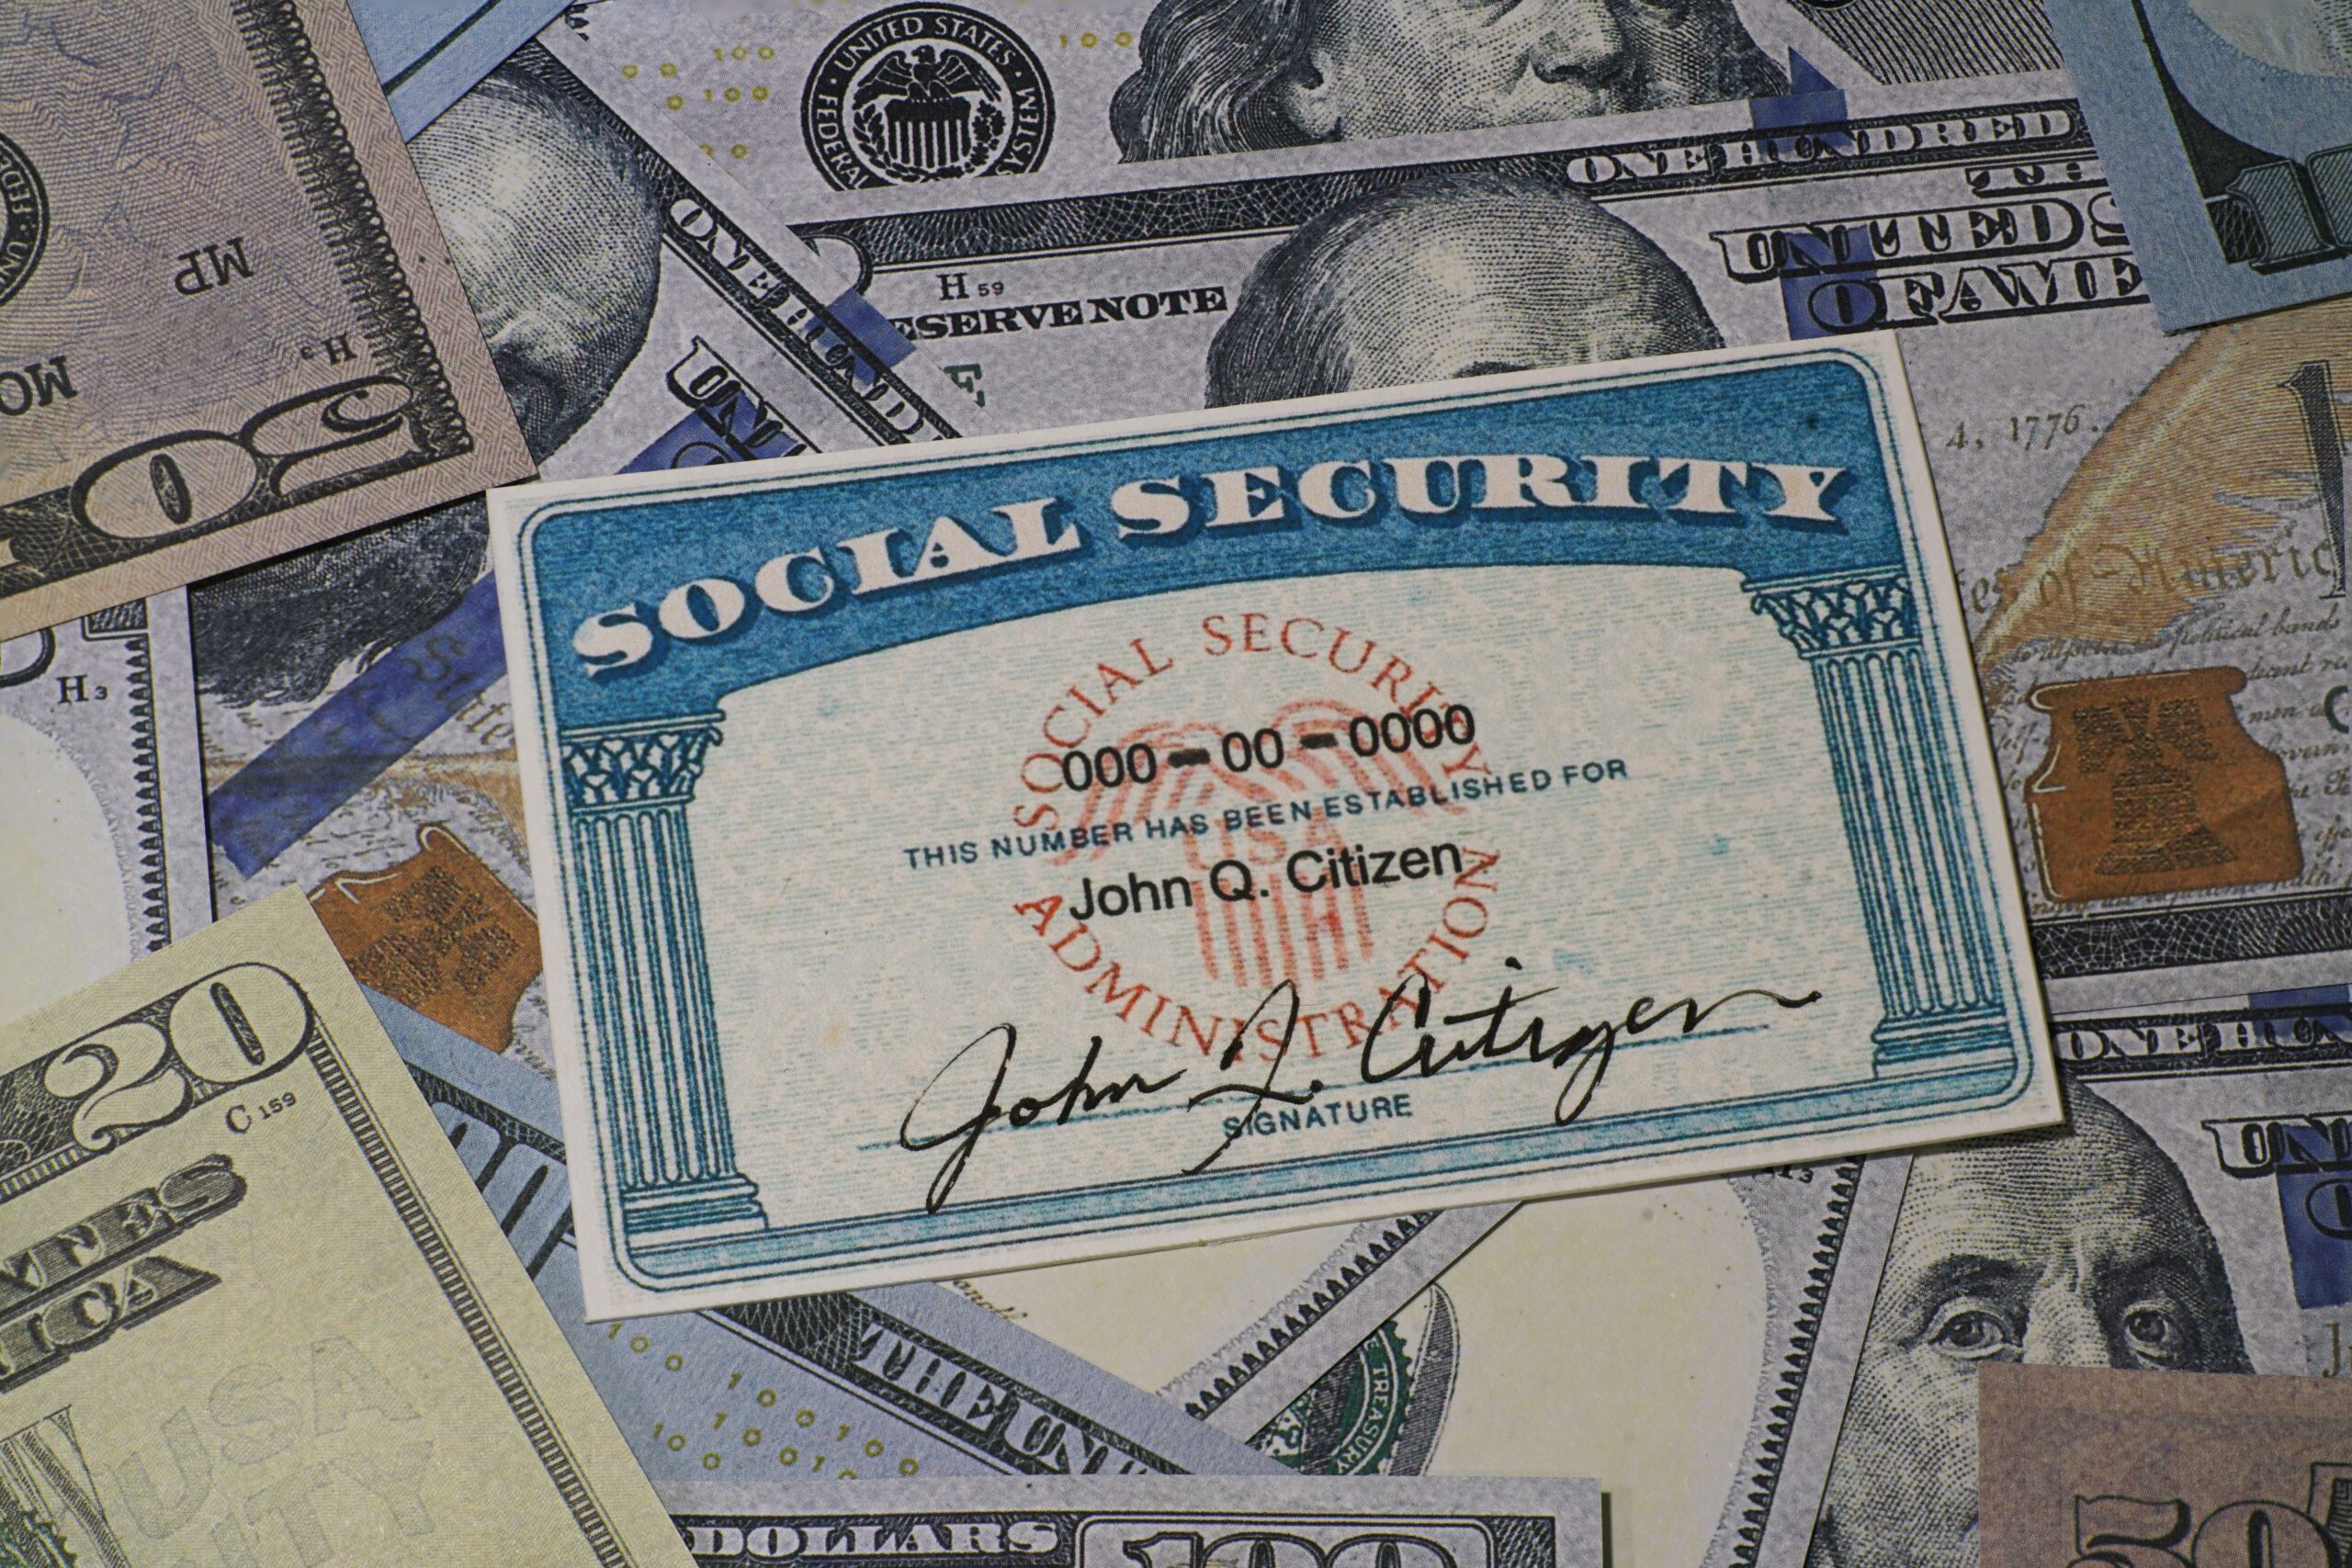 Social Security Administration asks for these requirements to give SSI